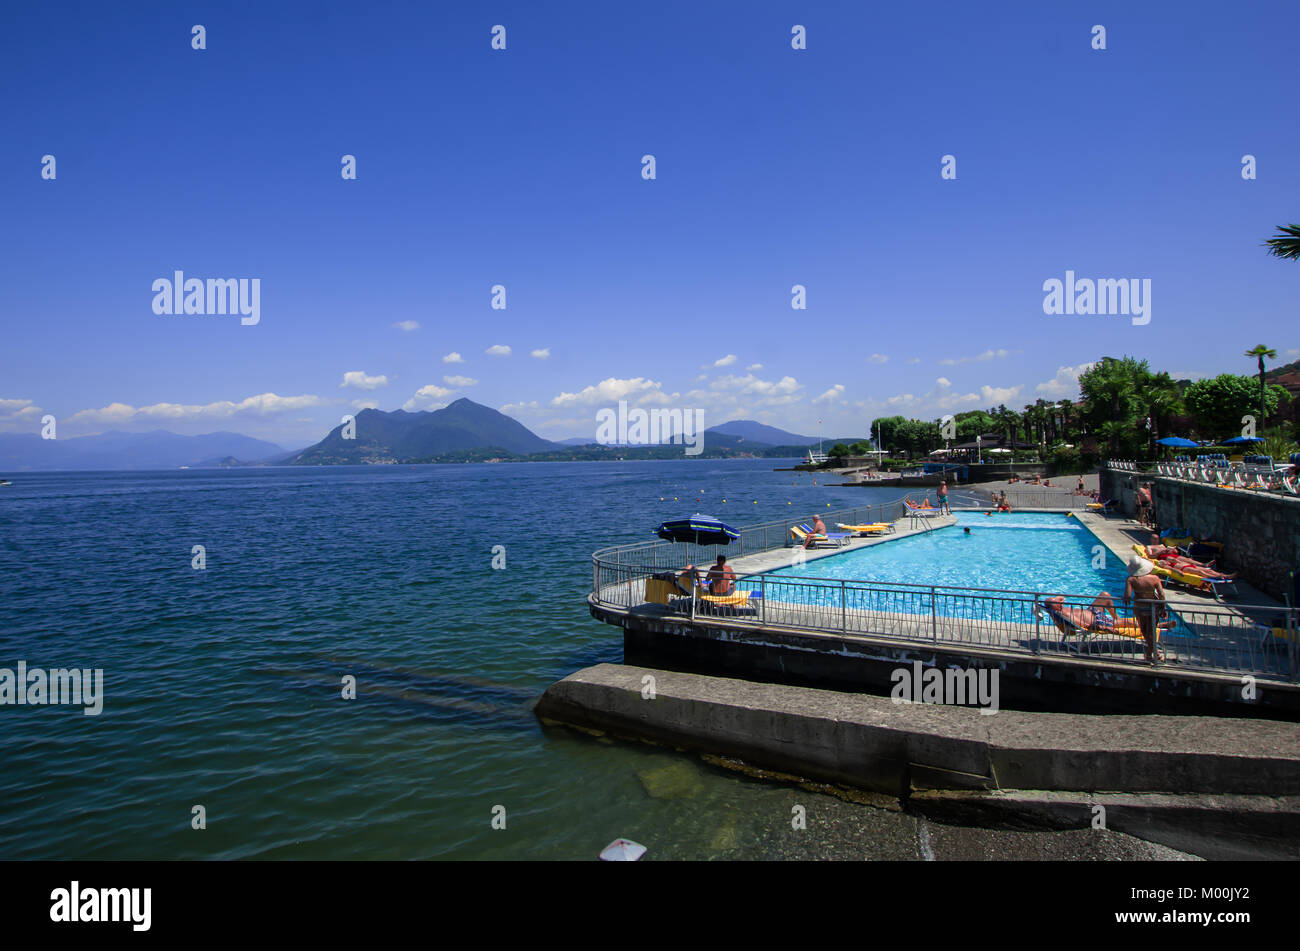 tourists during a summer holiday tan in a beautiful lake-side pool. Lake Maggiore, Italy Stock Photo